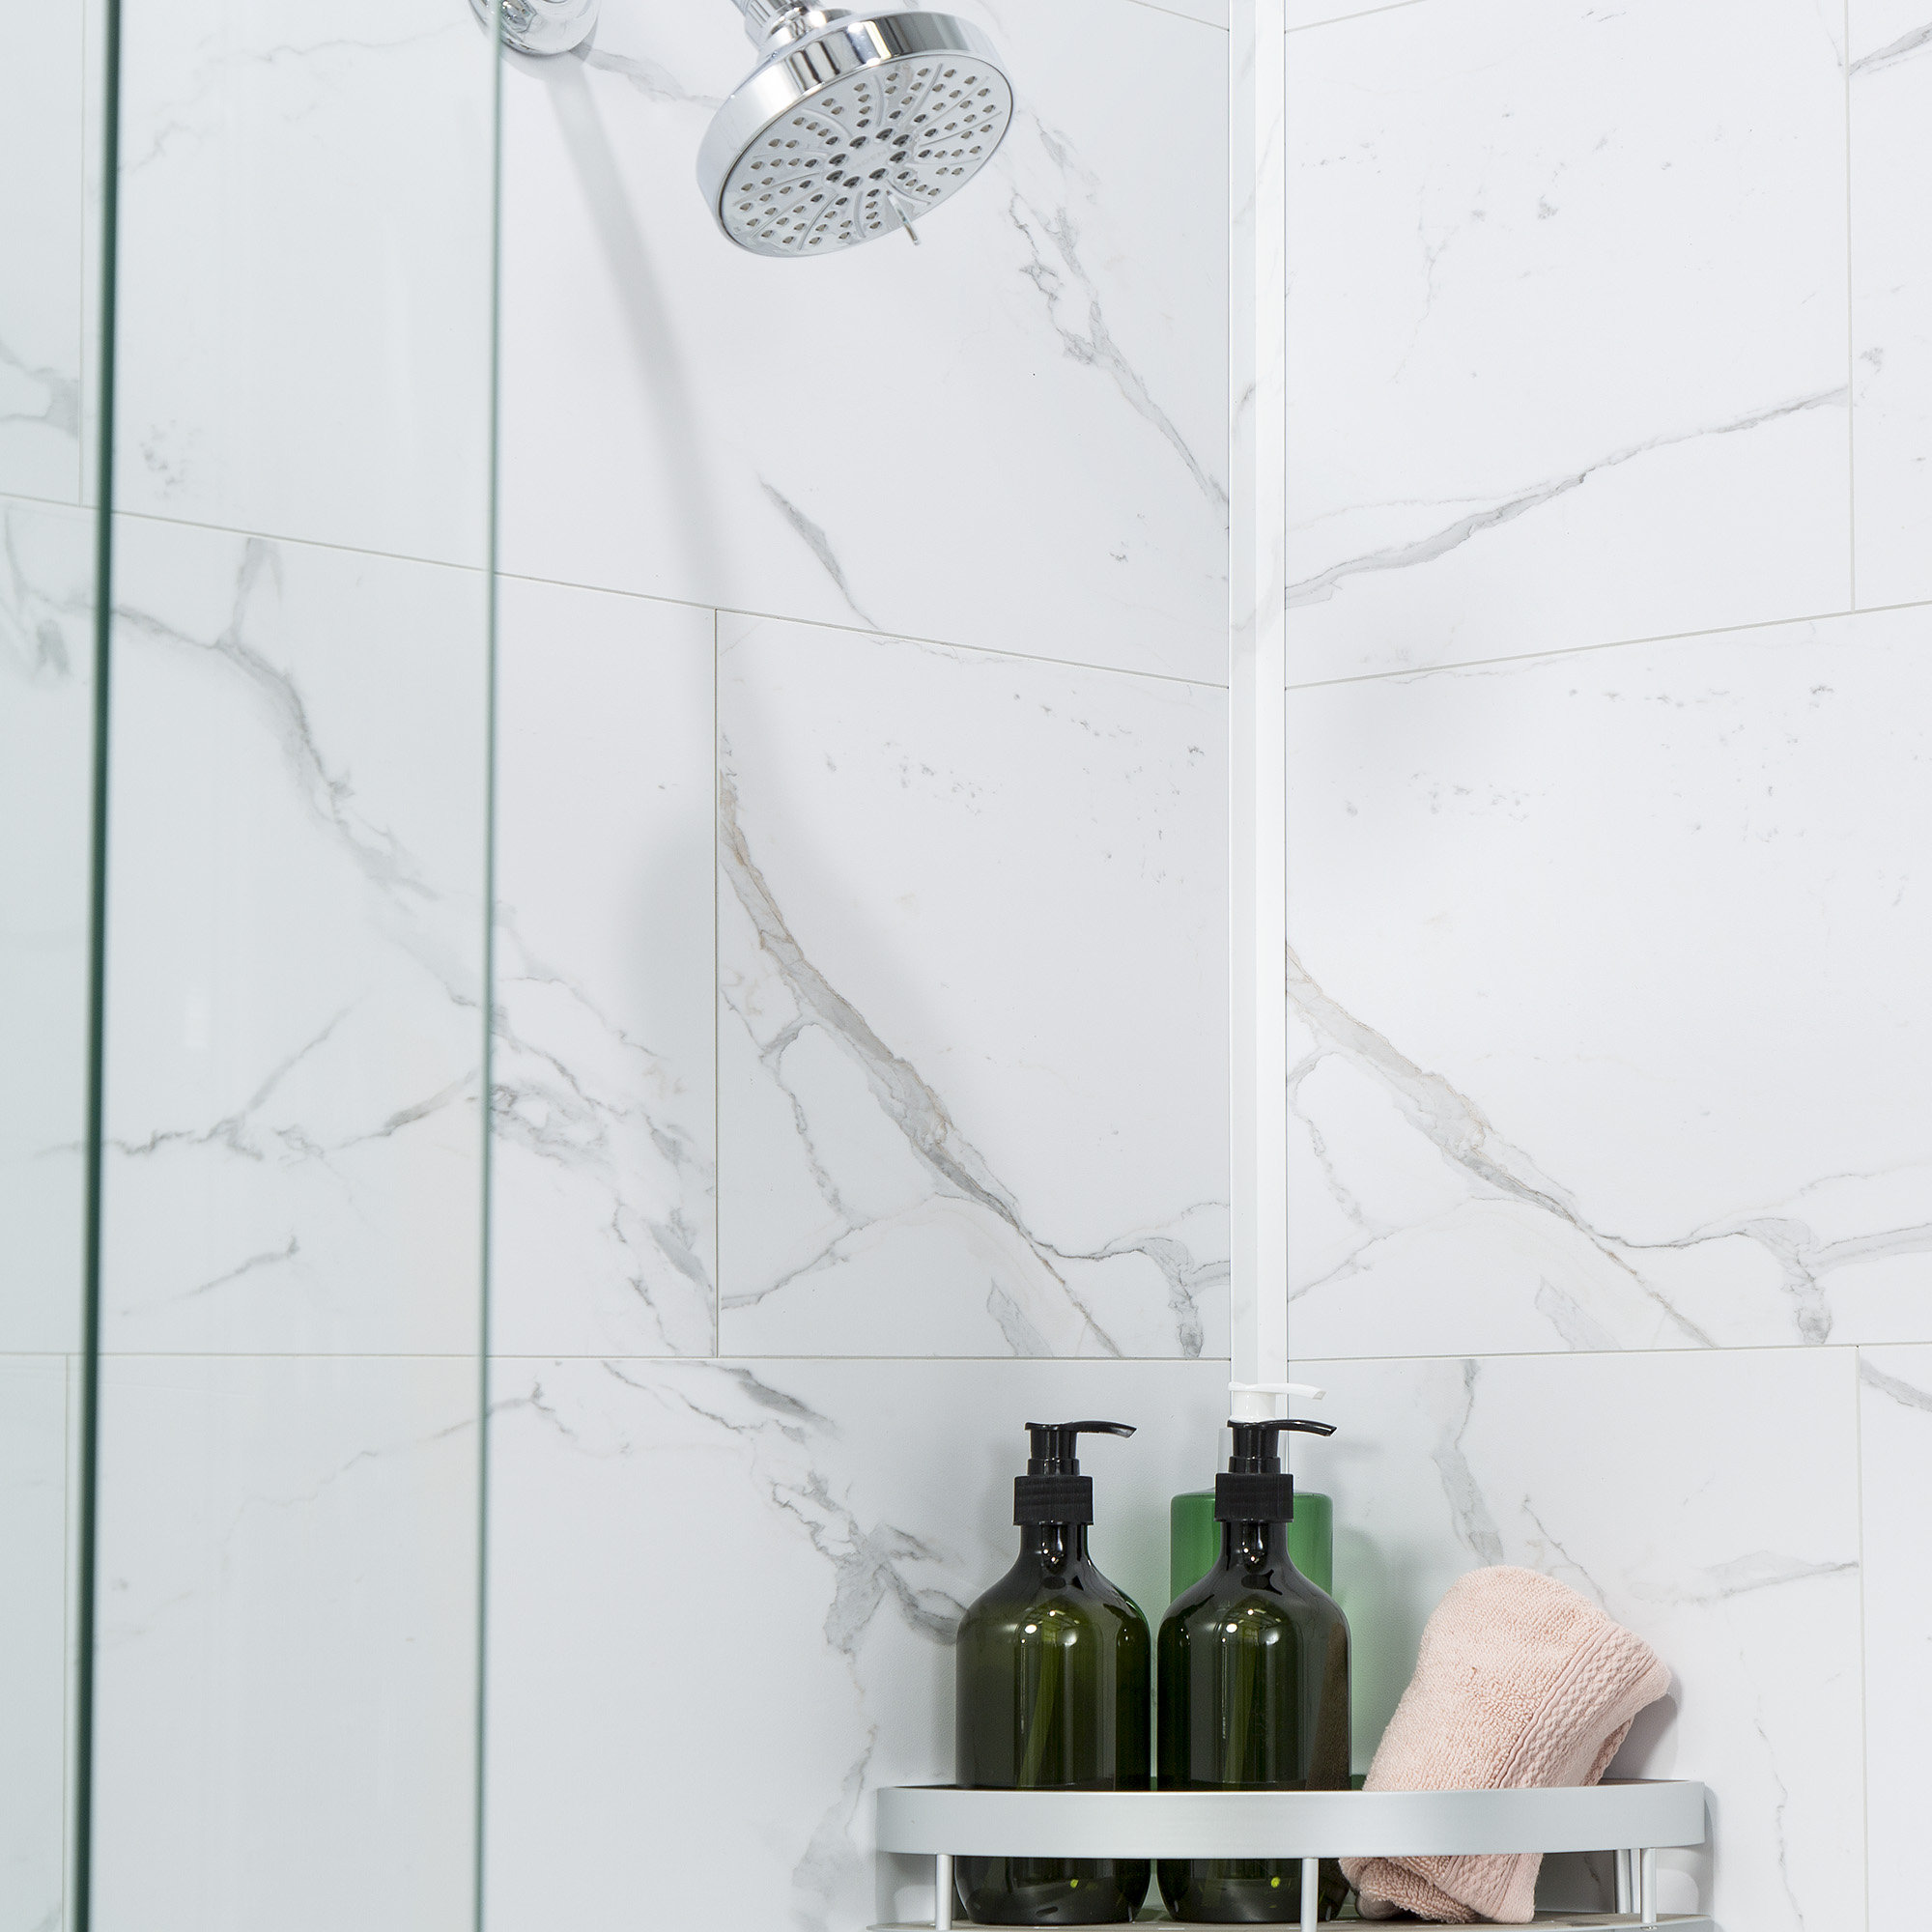 Palisade 23.2 in. x 11.1 in. Tile Shower and Tub Surround Kit in Carrara Marble